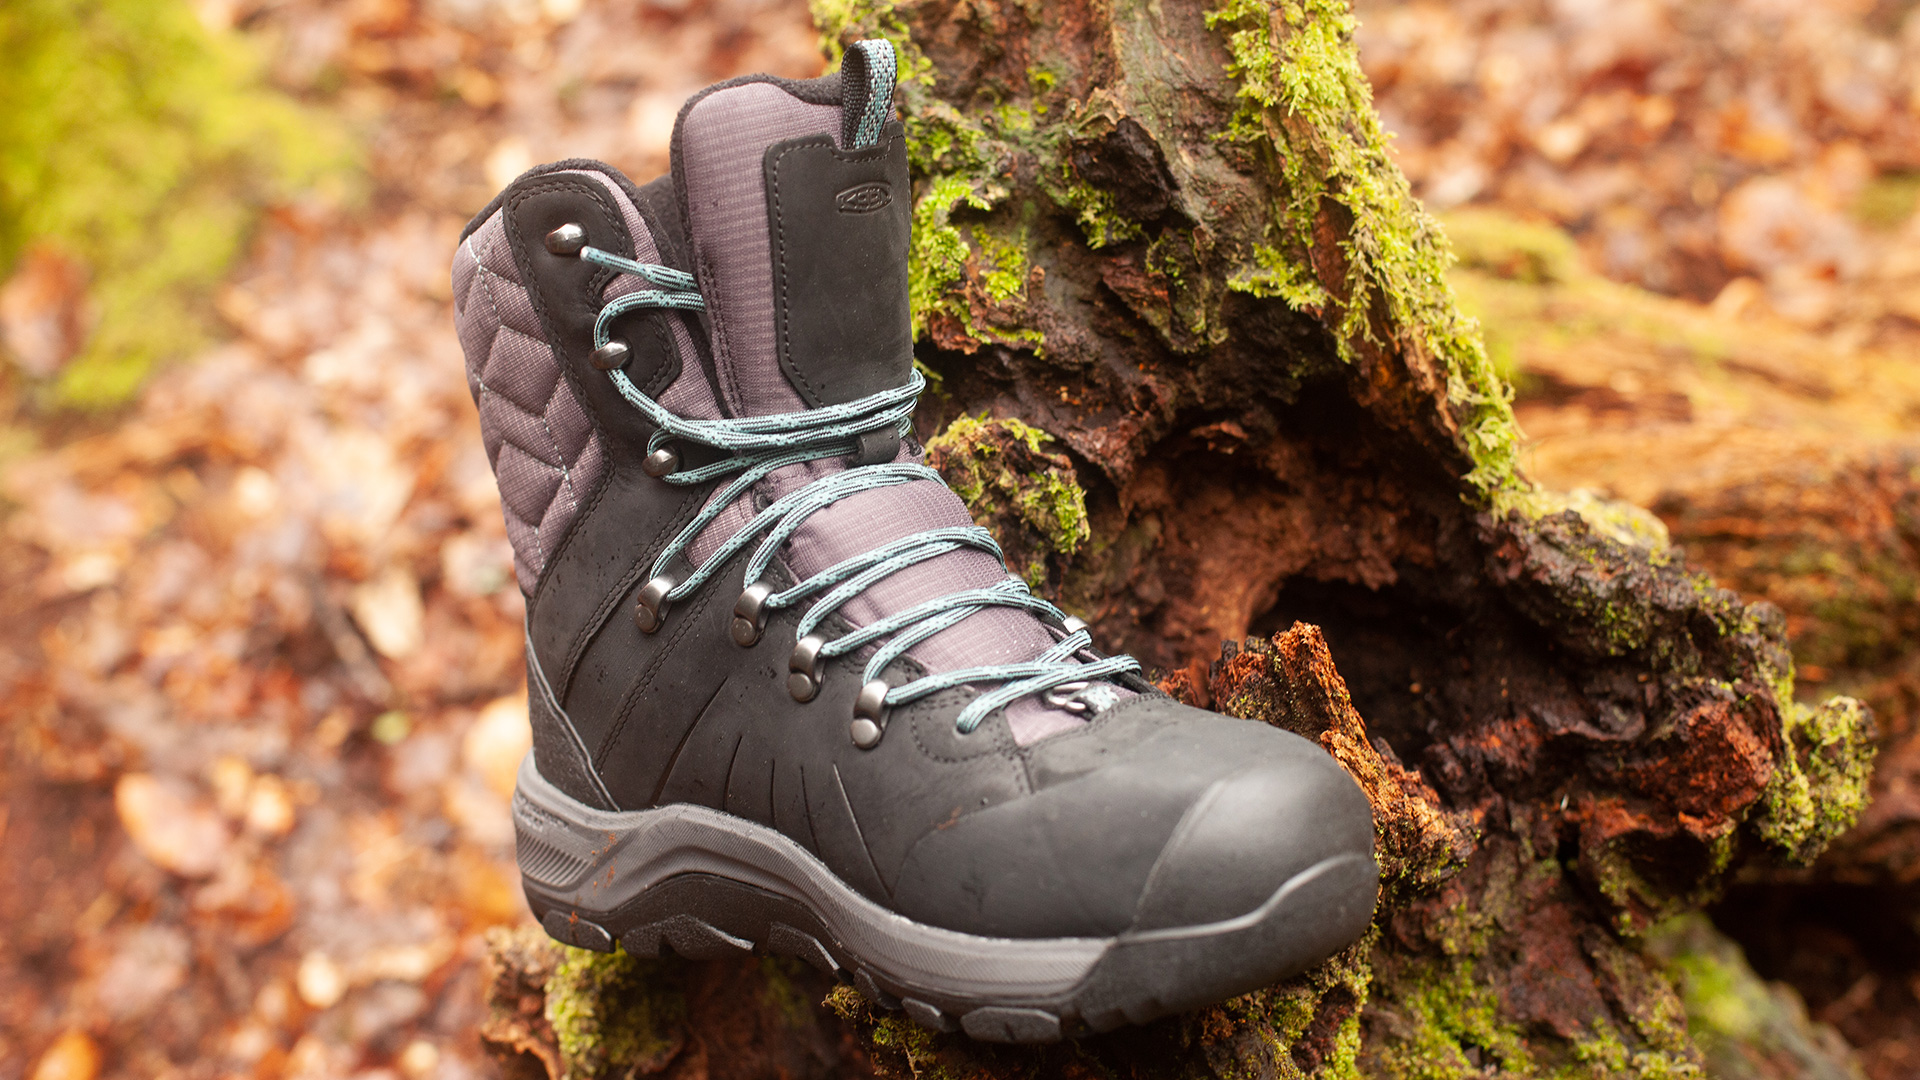 Keen Revel IV Polar High review: a sturdy winter hiking boot | T3